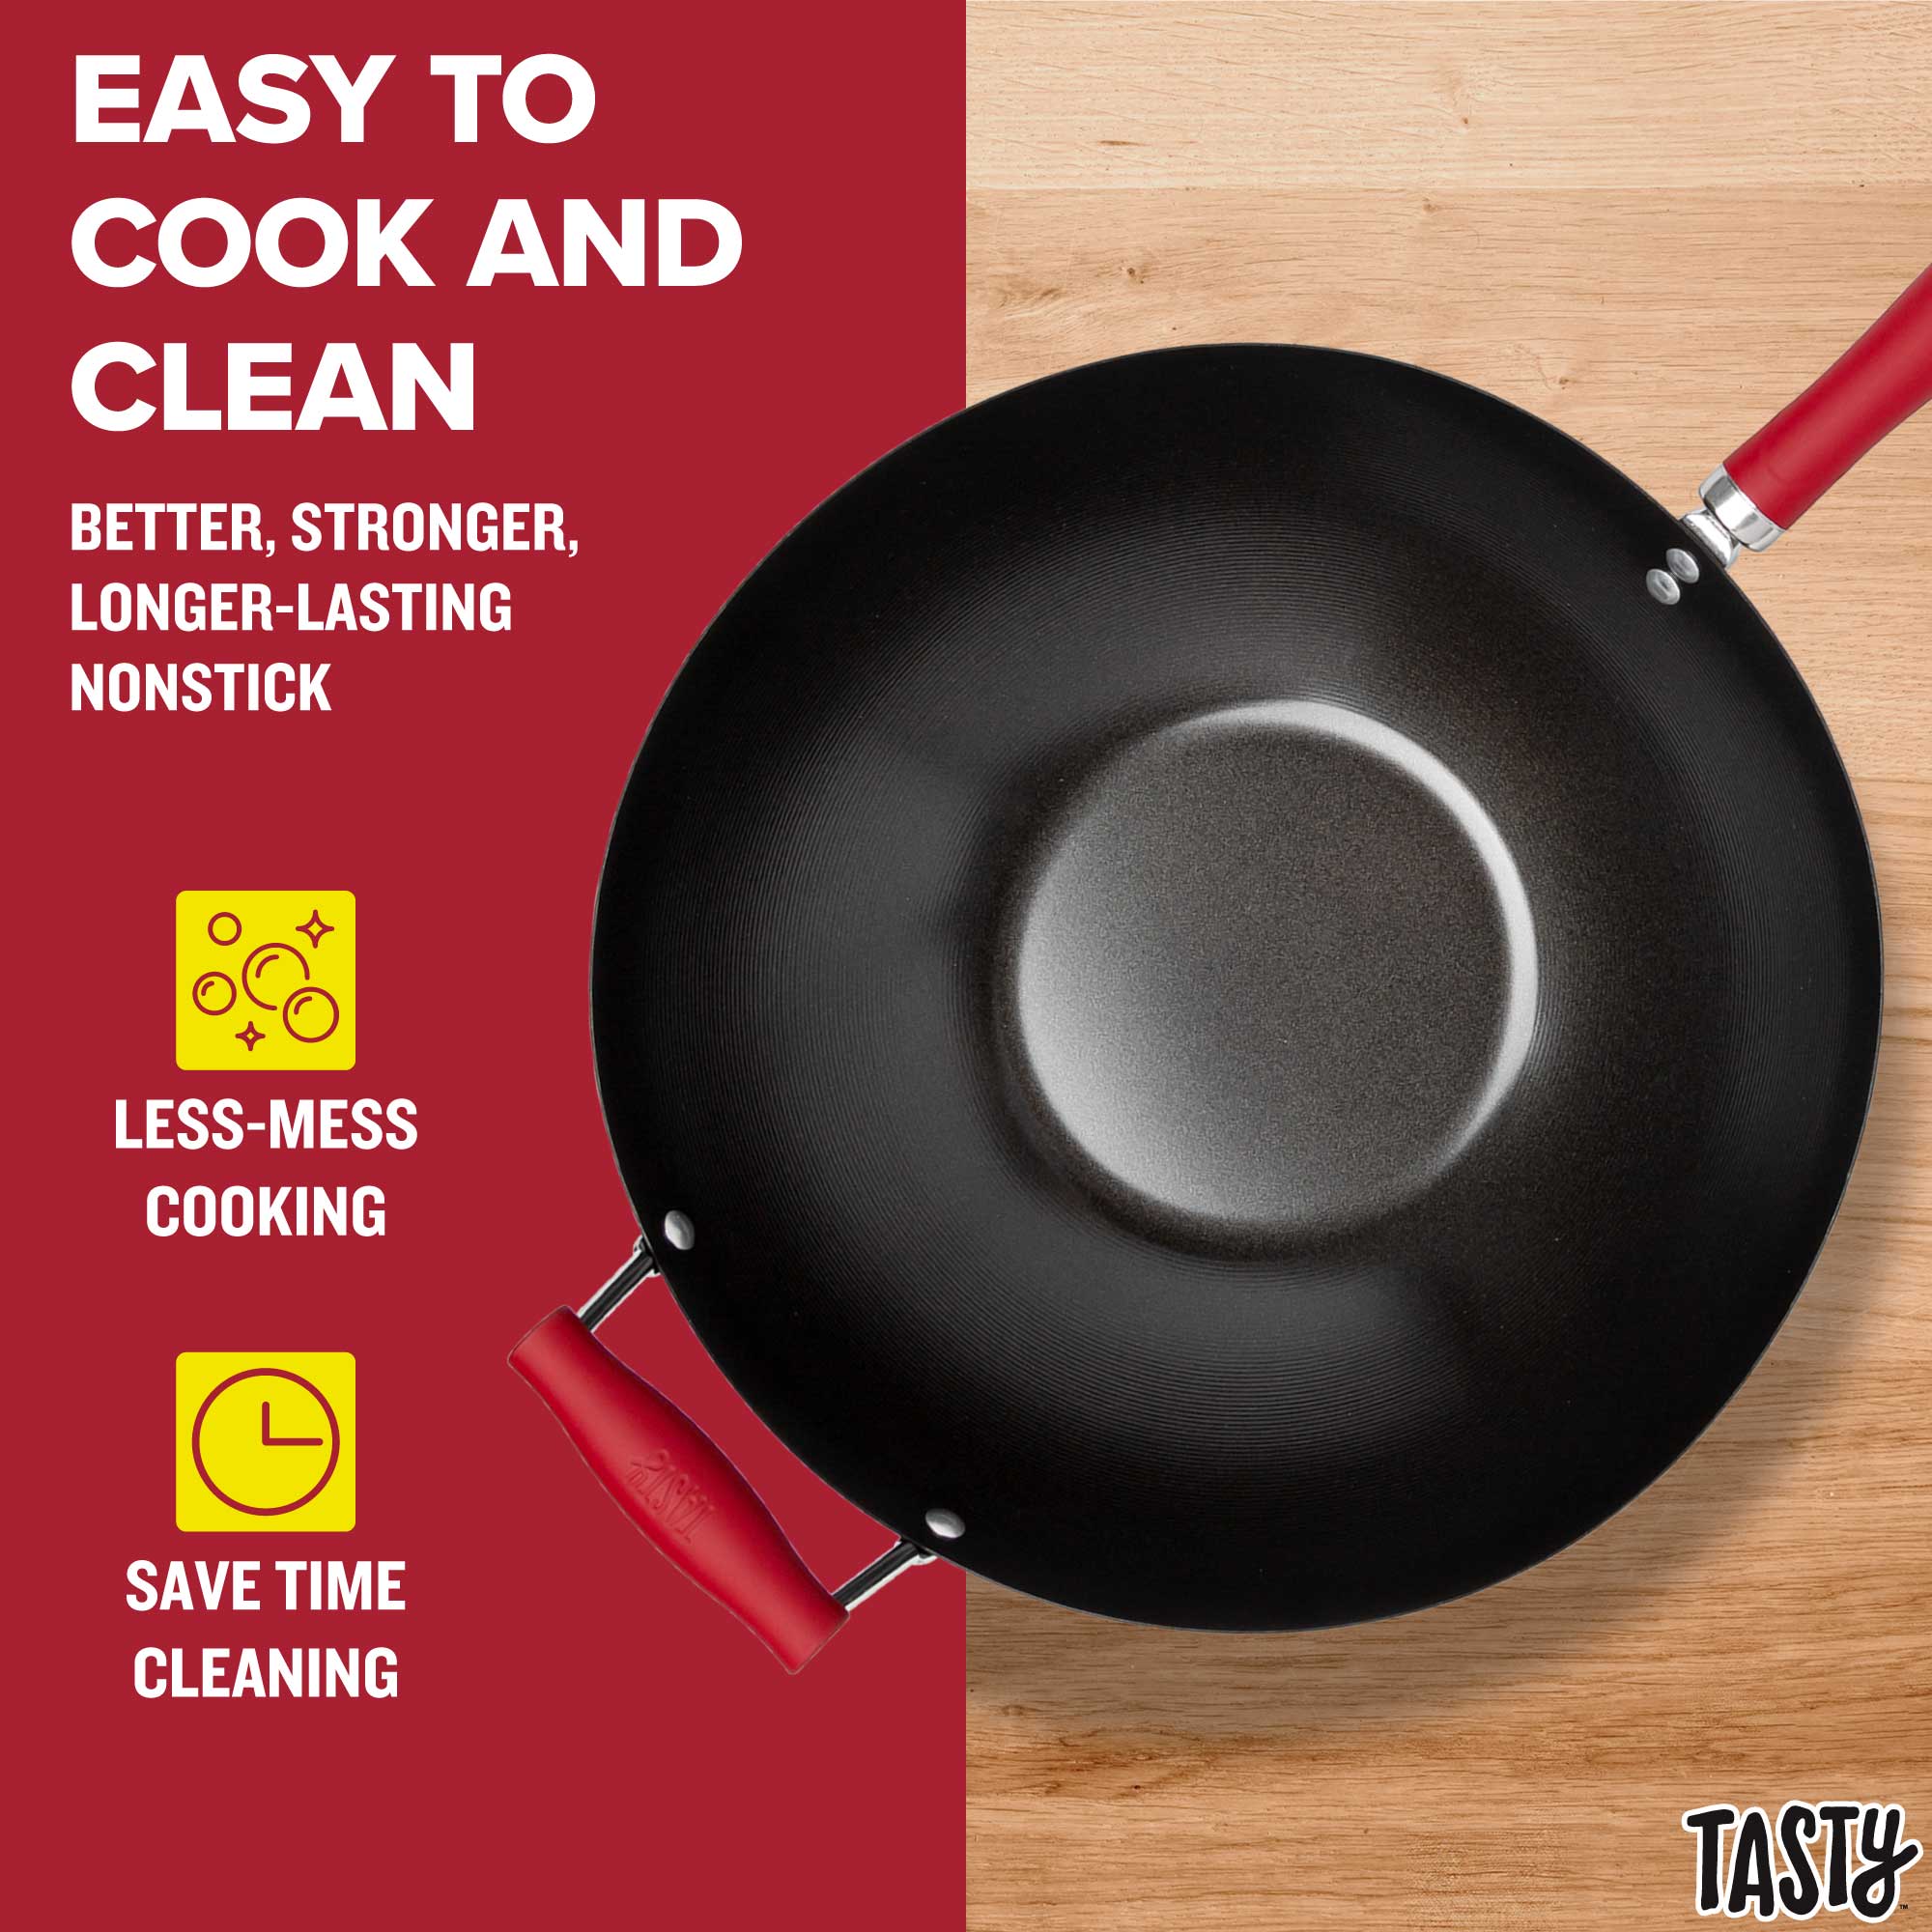 Tasty Carbon Steel Non-Stick Stir Fry Pan/Wok, 14 inch, Red - image 5 of 9